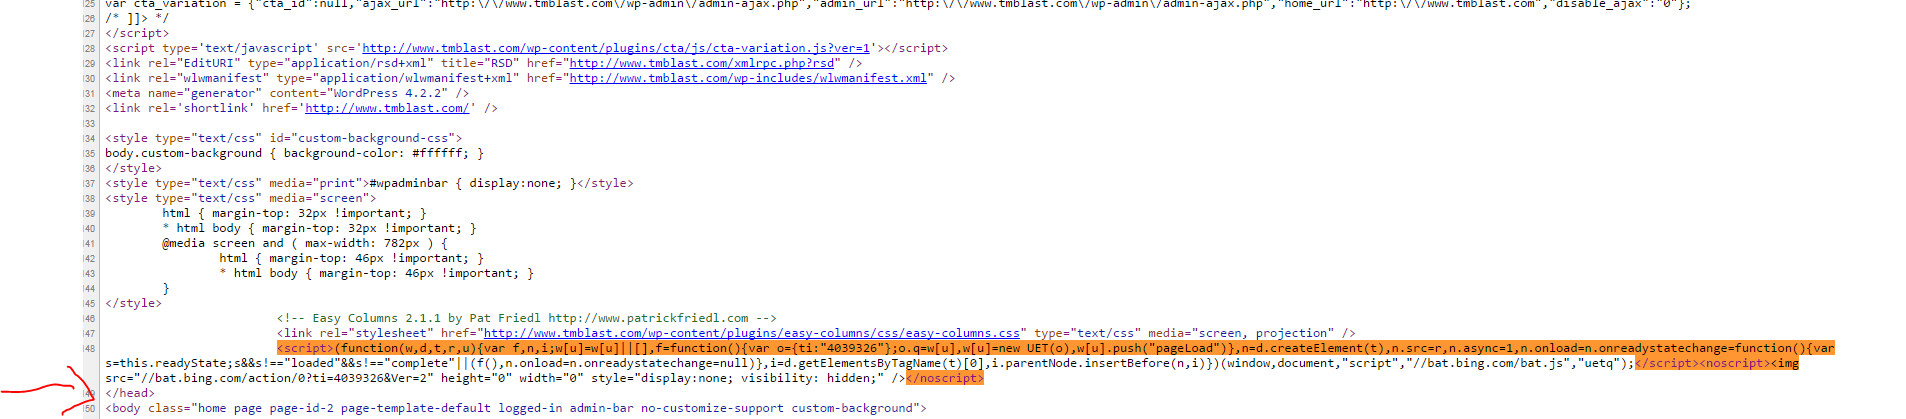 Here is the tracking code that is right before the head in Bing Ads